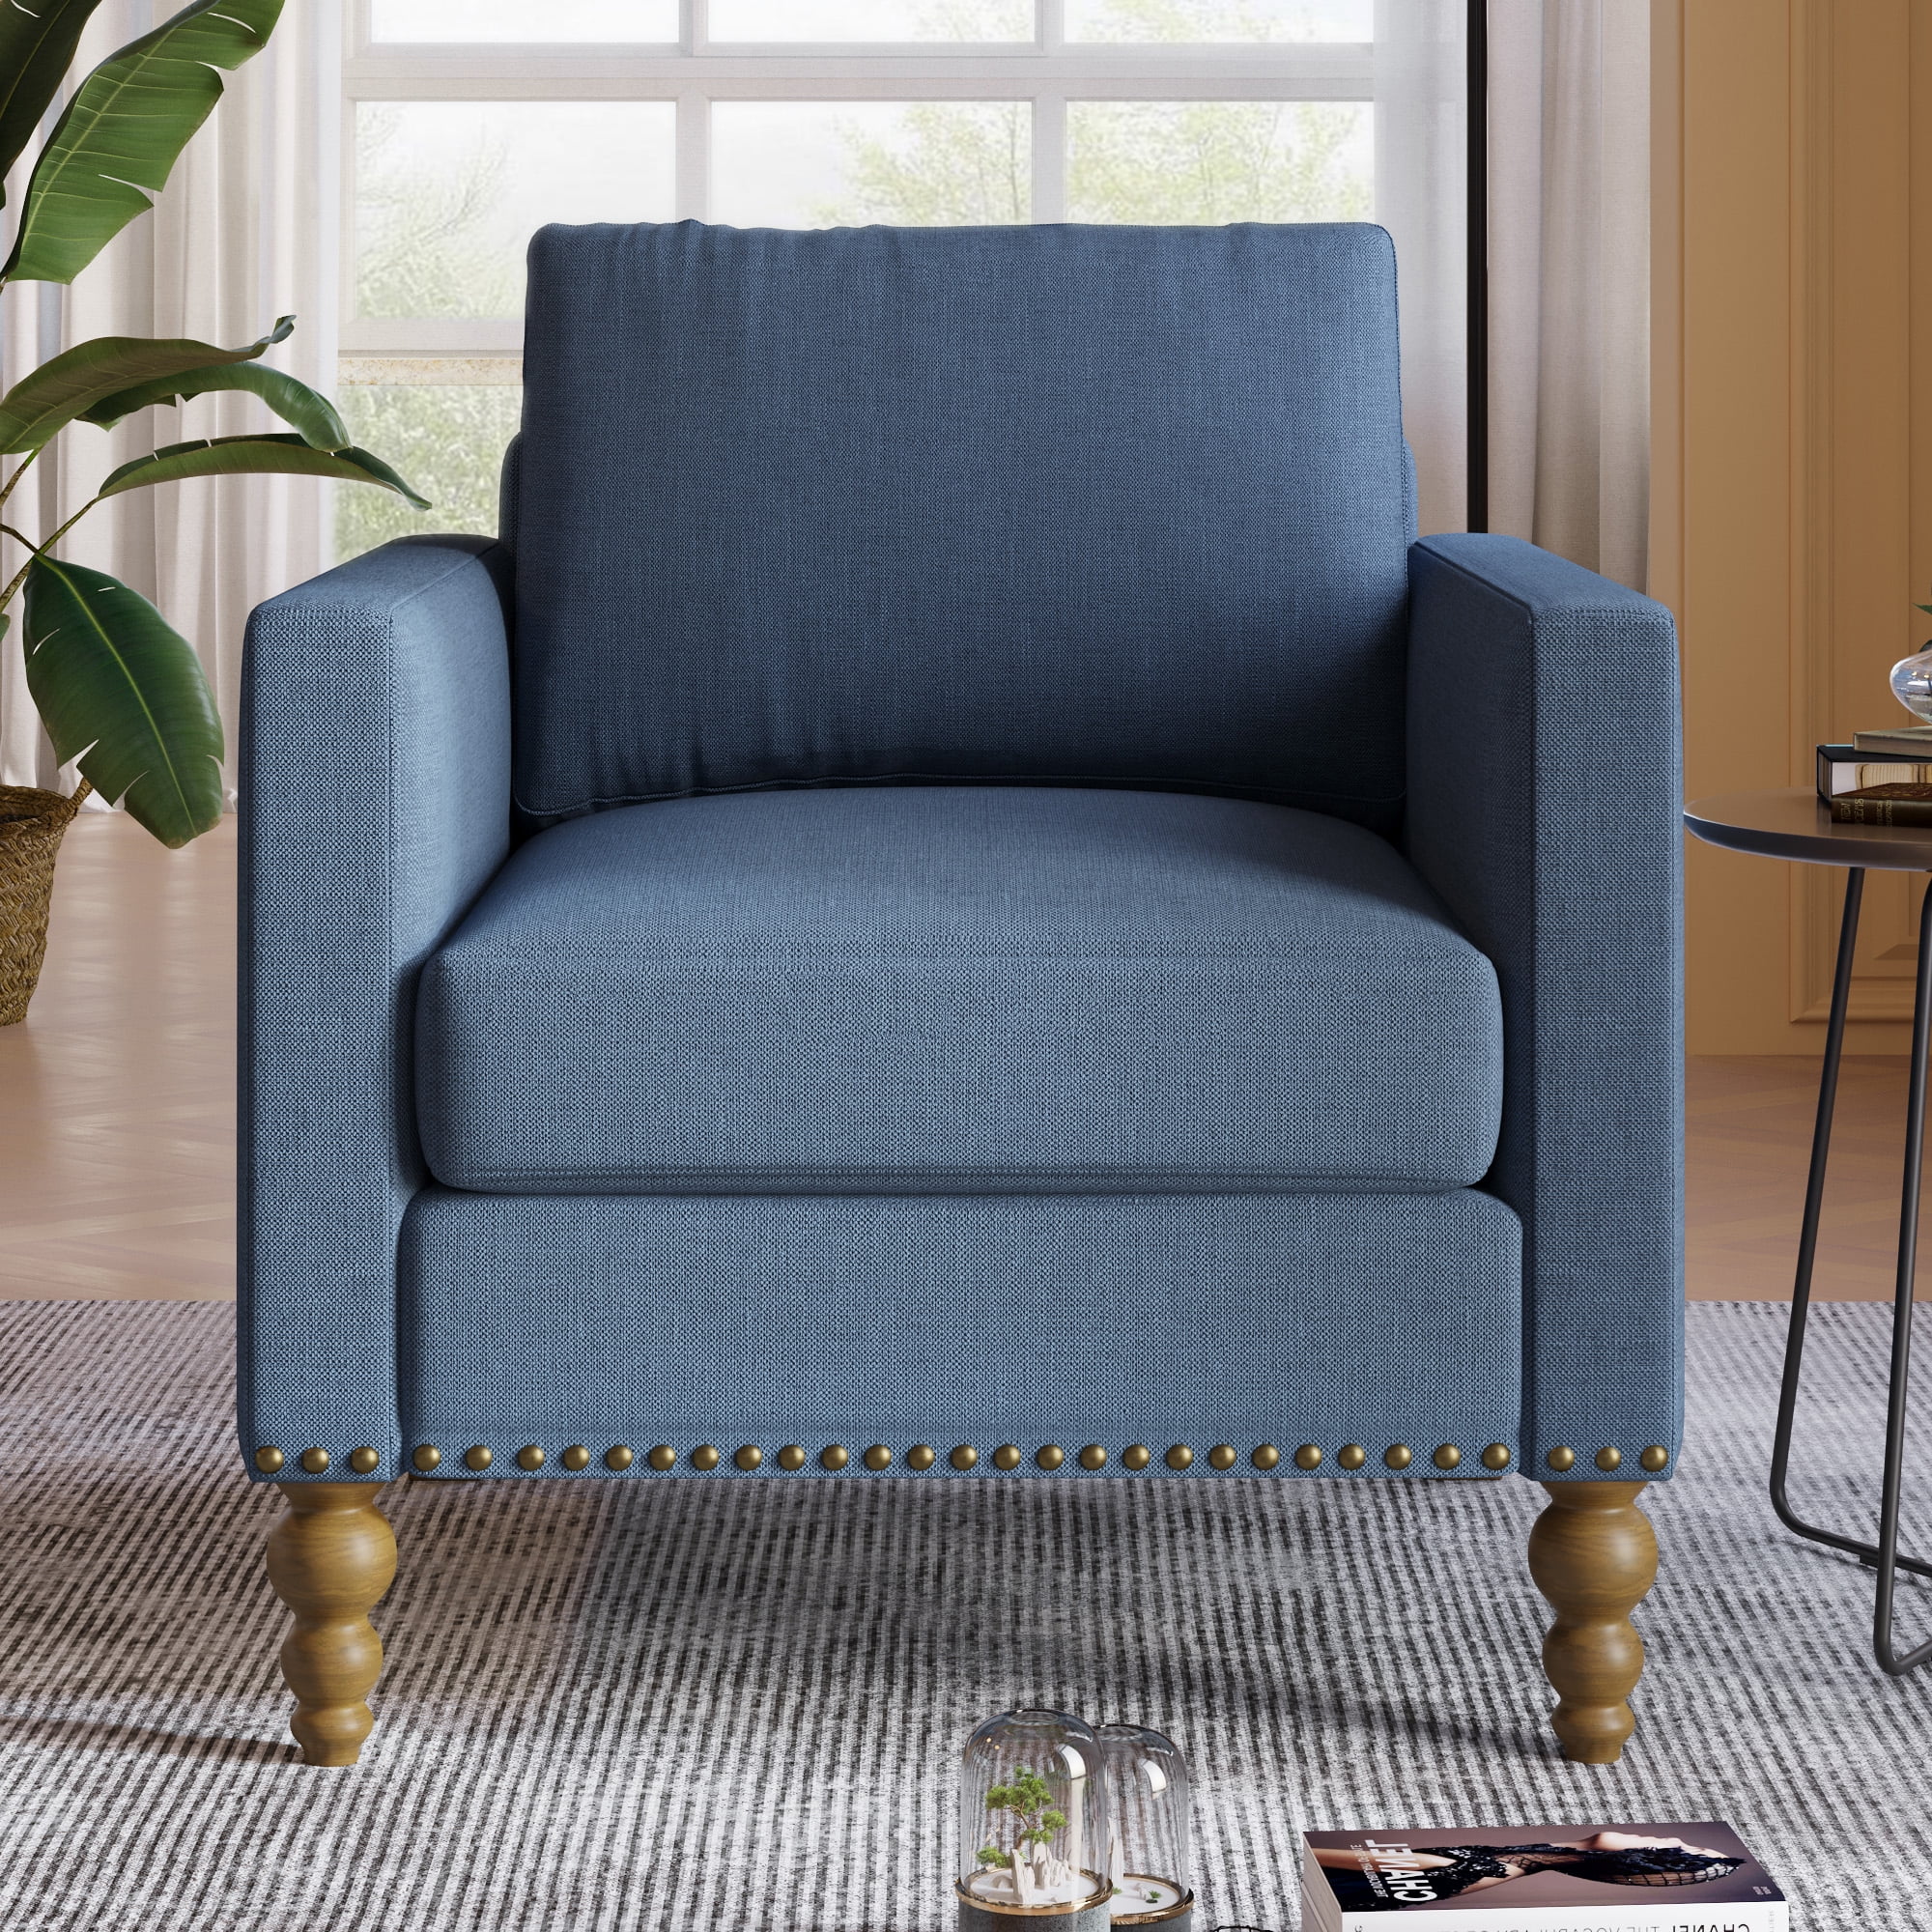 SLEERWAY Accent Chair with Small Pillow, Mid Century Armchair with  Decorative Nailheads and Solid Wooden Legs, Modern Chairs for Living Room  and